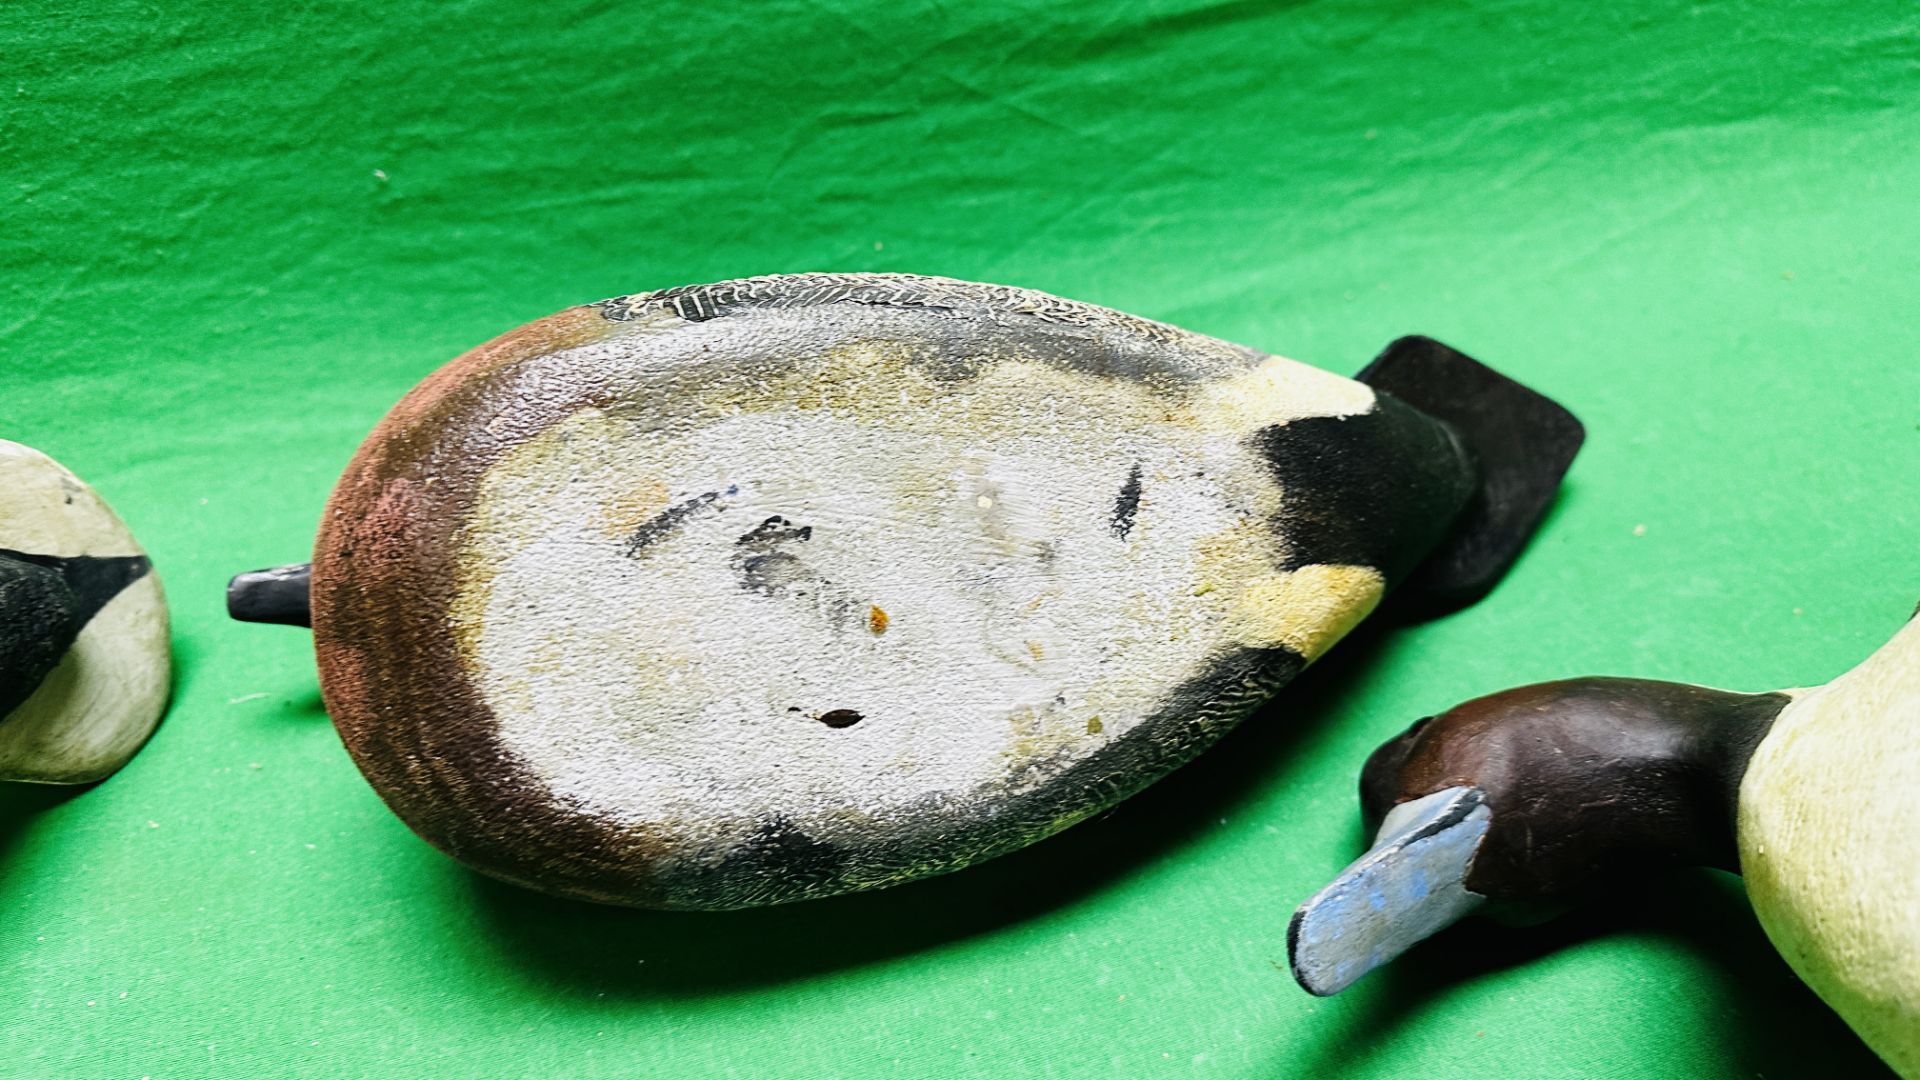 A HANDCRAFTED SET OF 4 DUCK DECOYS HAVING HANDPAINTED DETAIL AND GLASS EYES. - Image 13 of 13